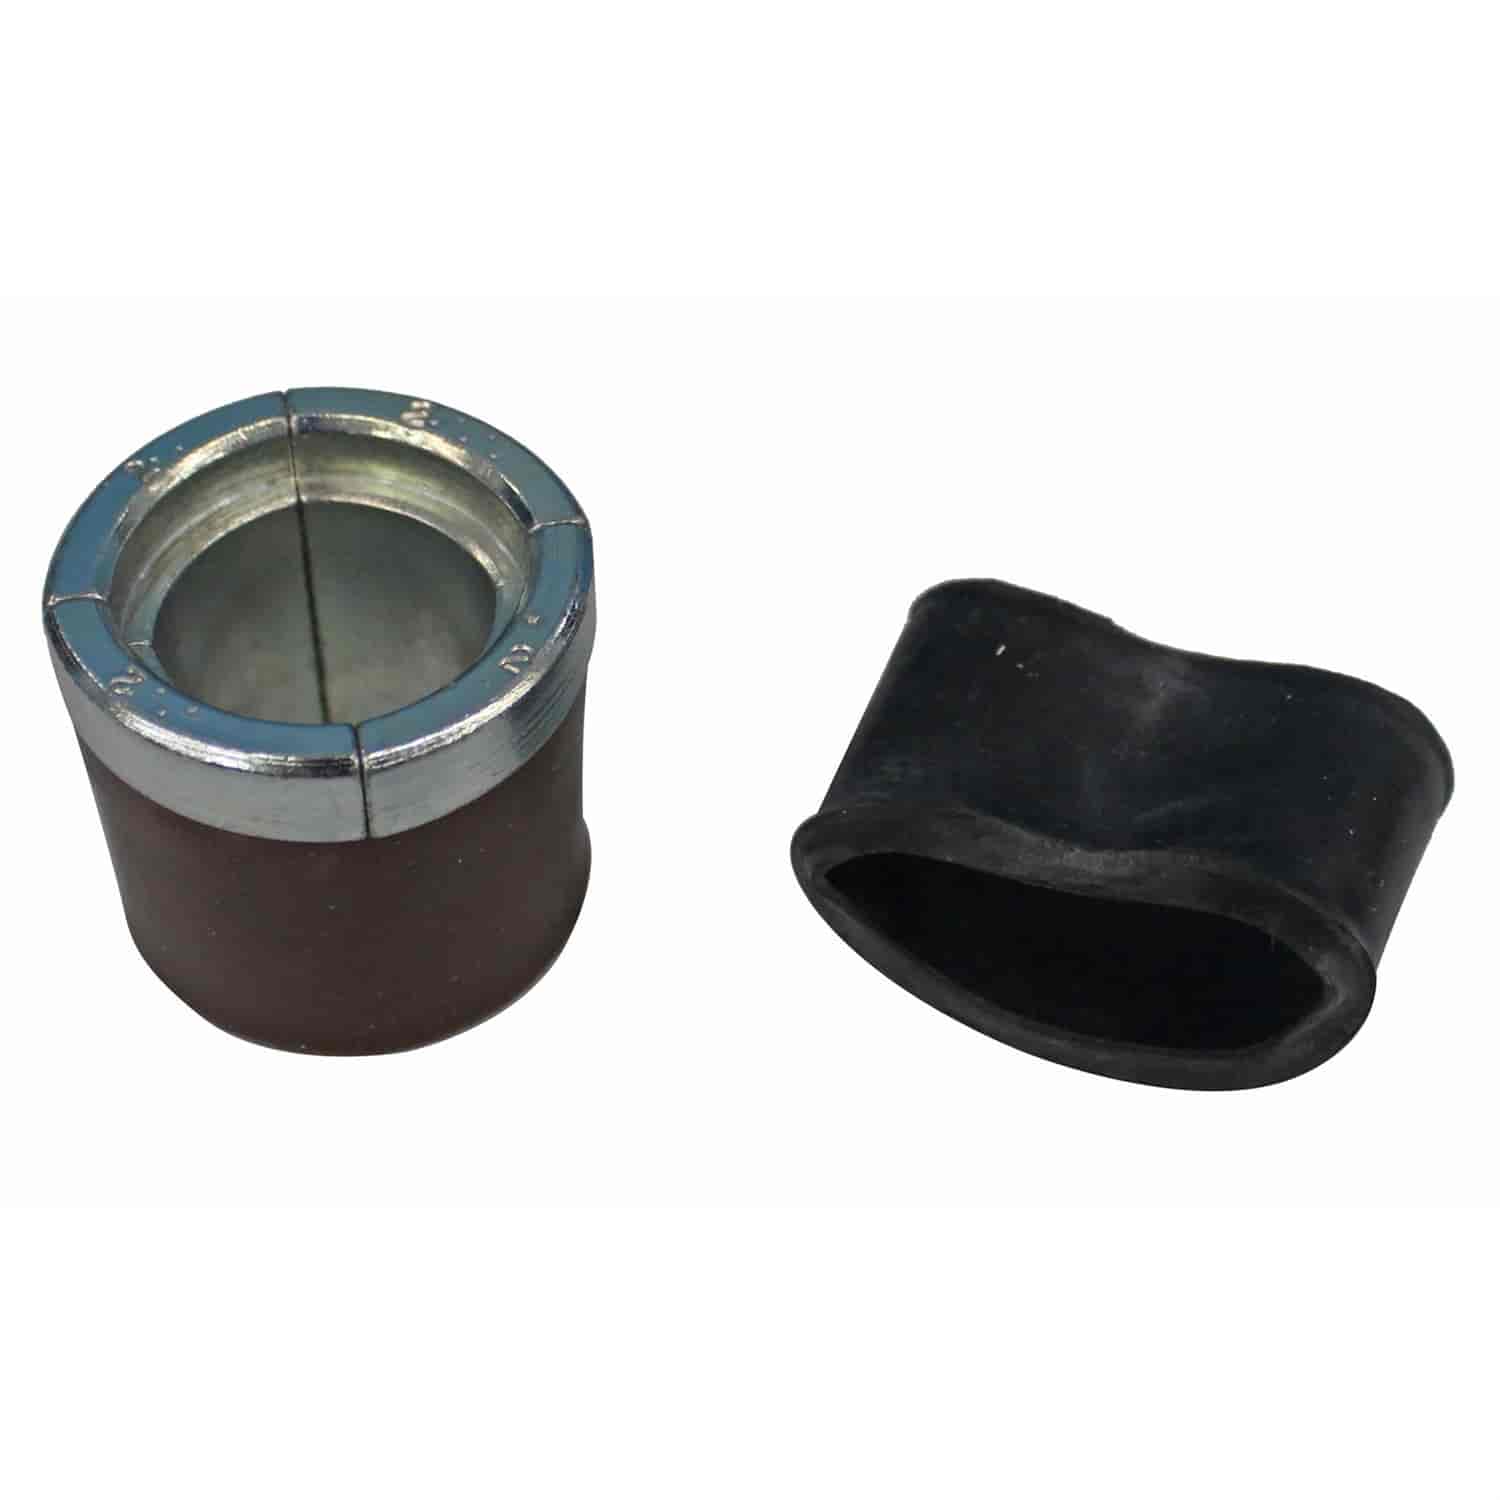 Expander Collet Bearing ID: 1.700" - 1.925"